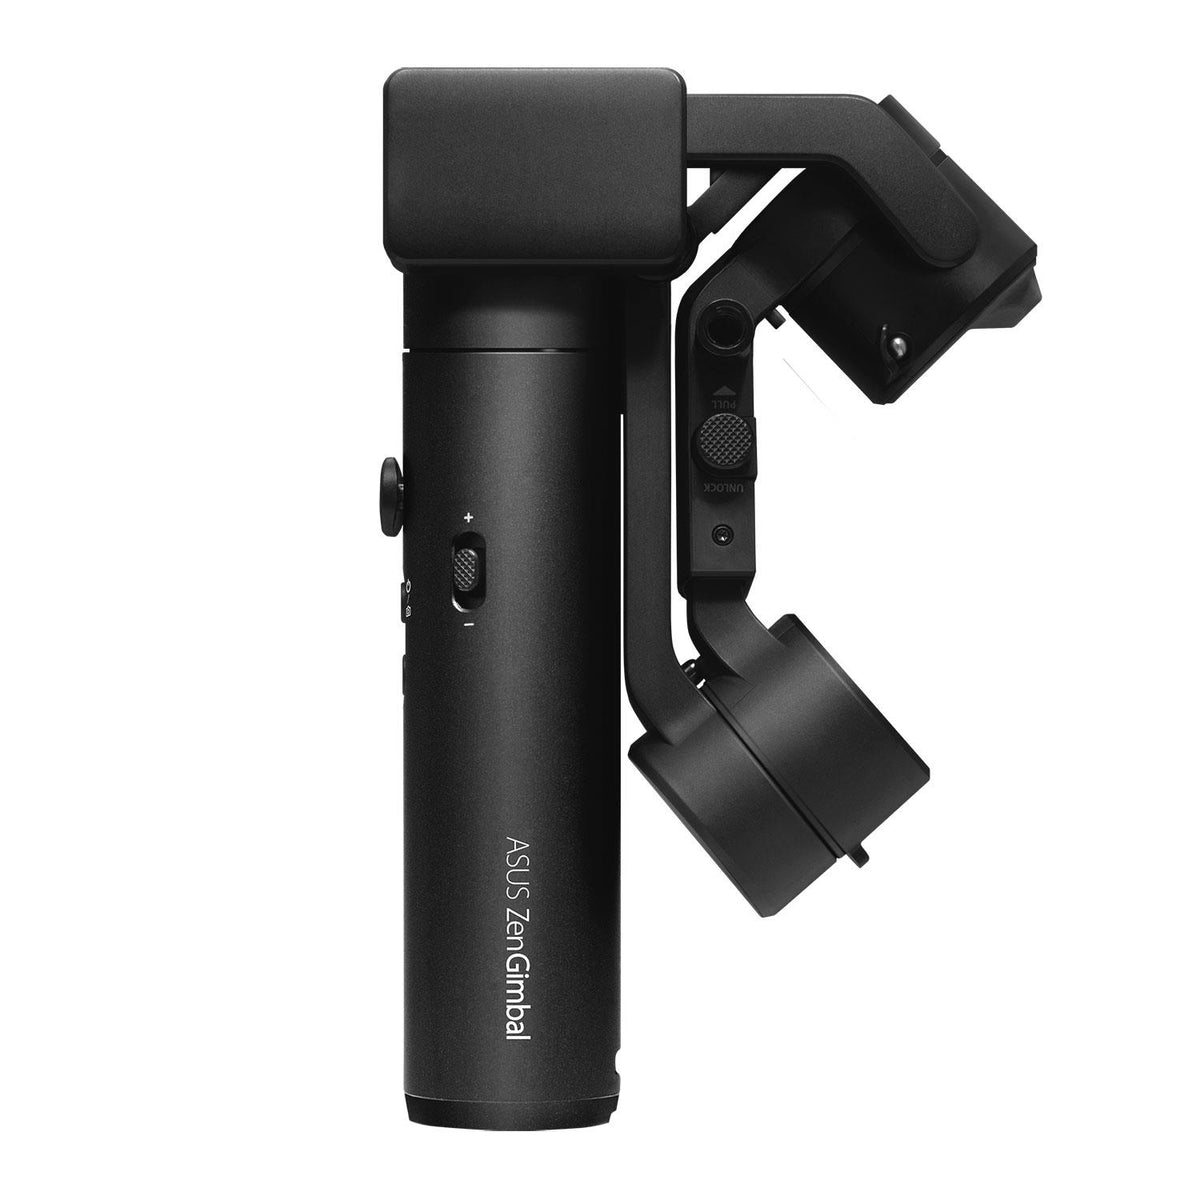 ASUS ZenGimbal 3-Axis Smartphone Gimbal Stabiliser for iOS/Android